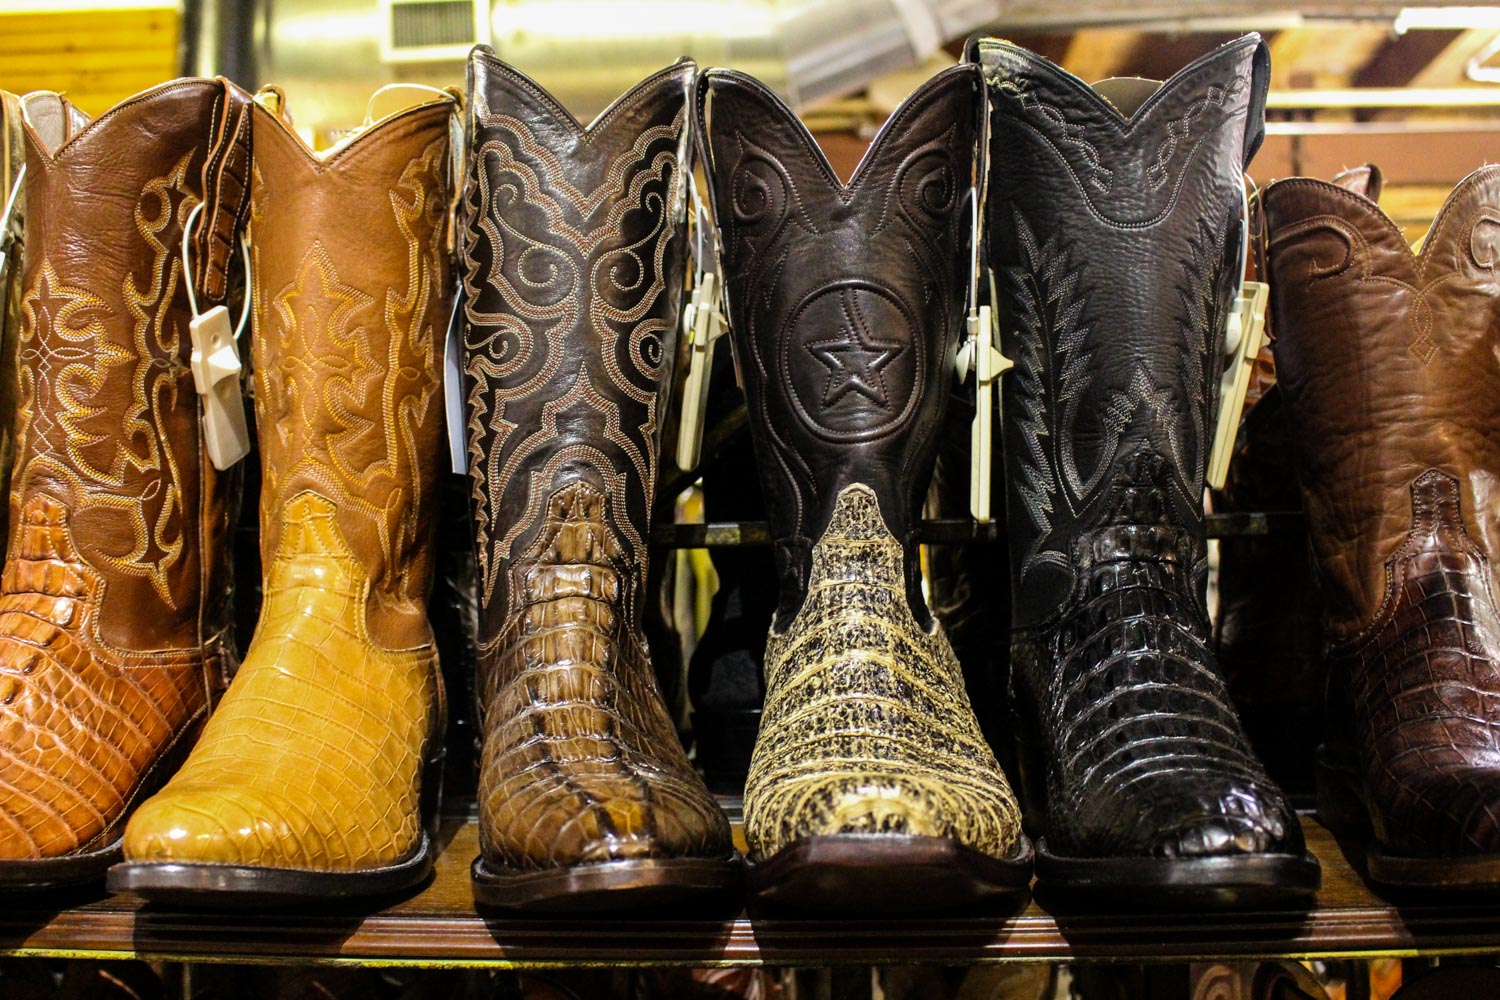 Cowboy boots at Wild Bill's Western Store © Shanna Jones / Lonely Planet